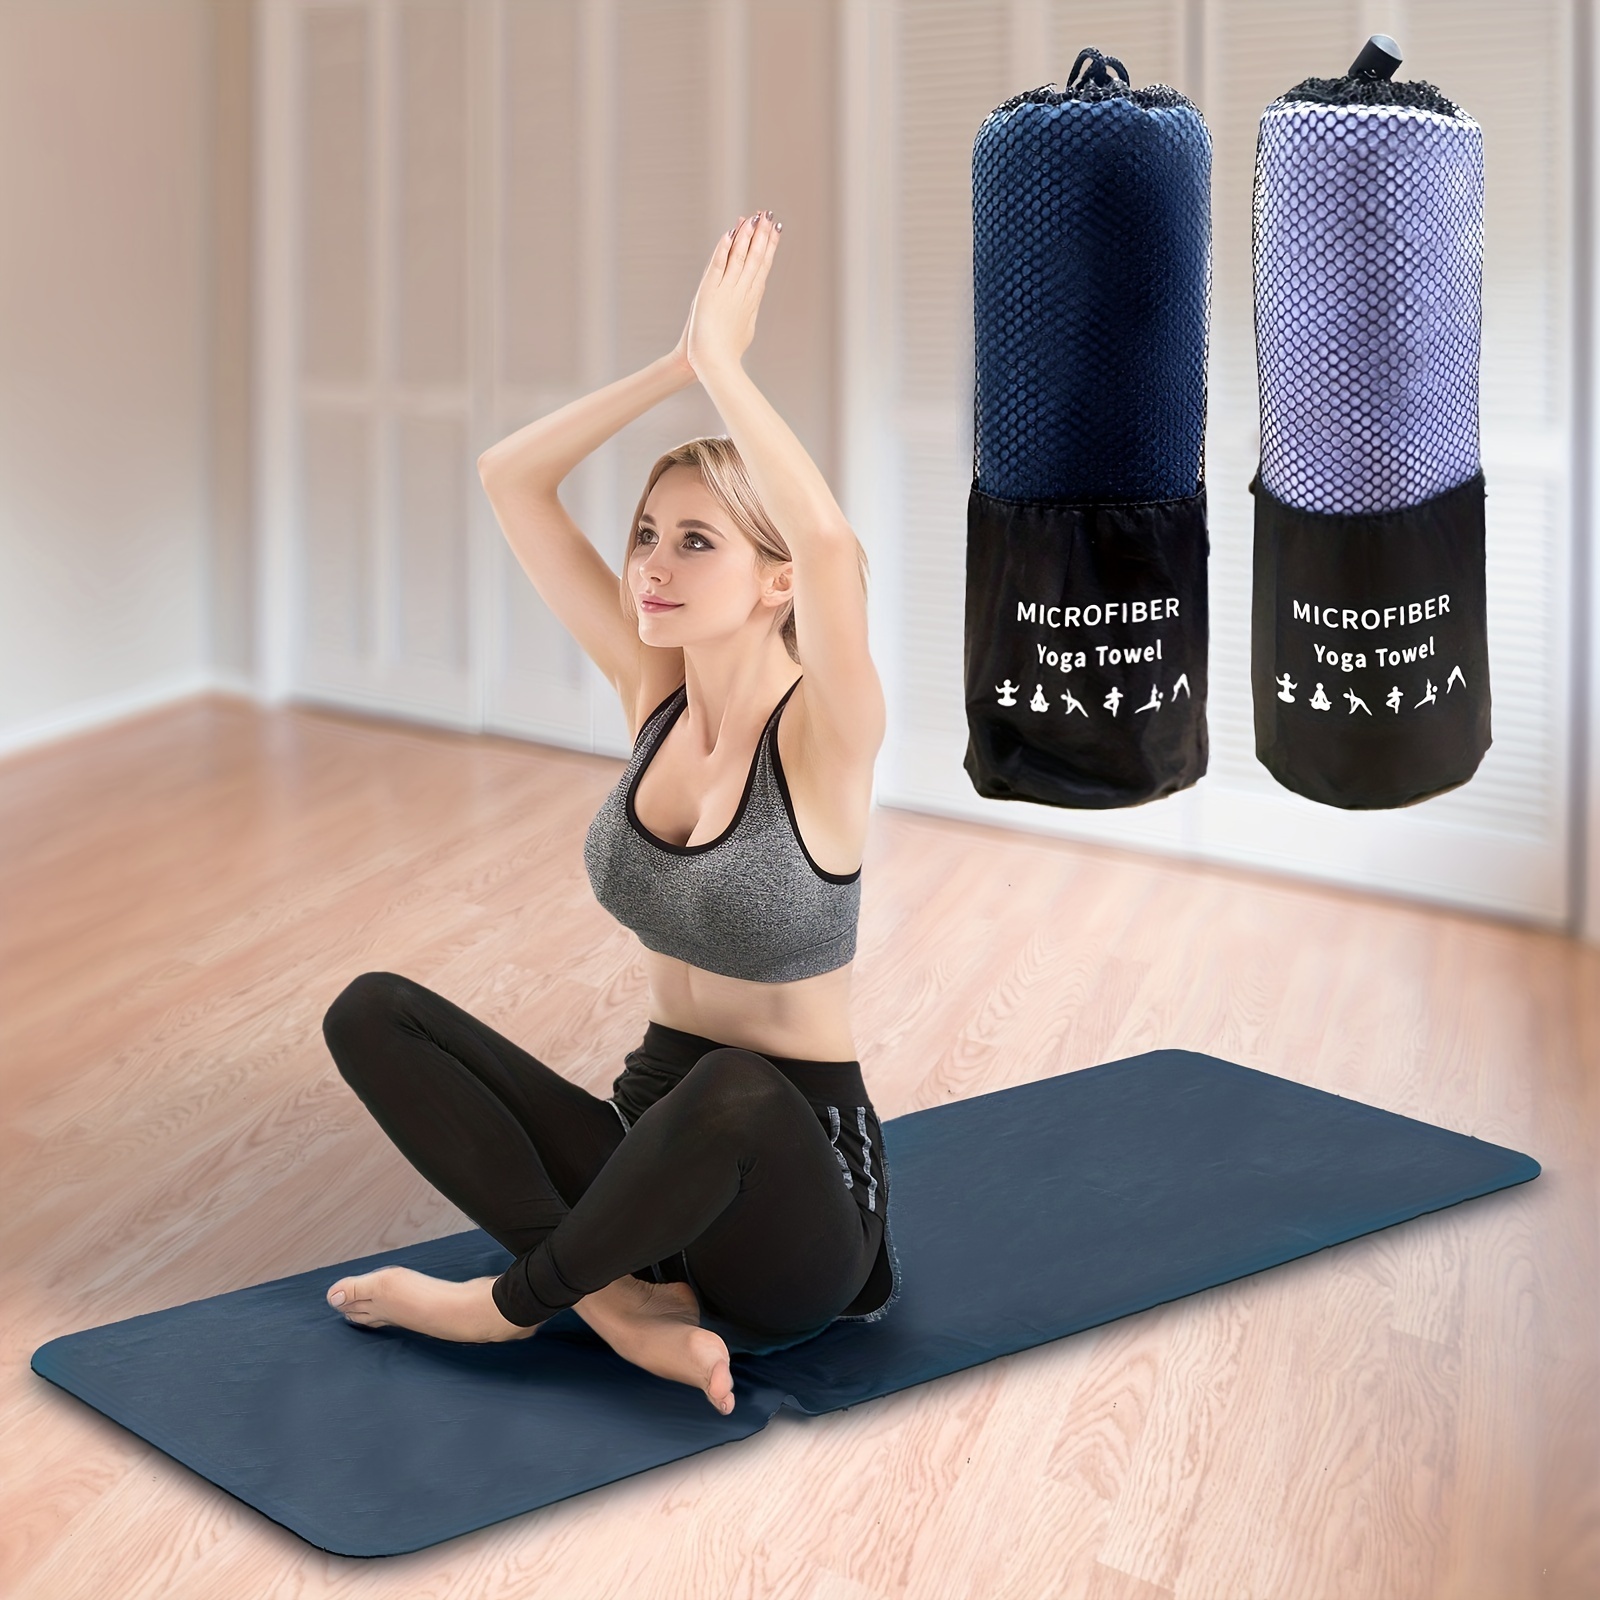 

Non-slip Yoga Towel With Storage Bag, Portable 24"x 72" Super-absorbent Quick Drying Soft Microfiber Towel For Outdoor Gym Yoga Pilates Fitness Training